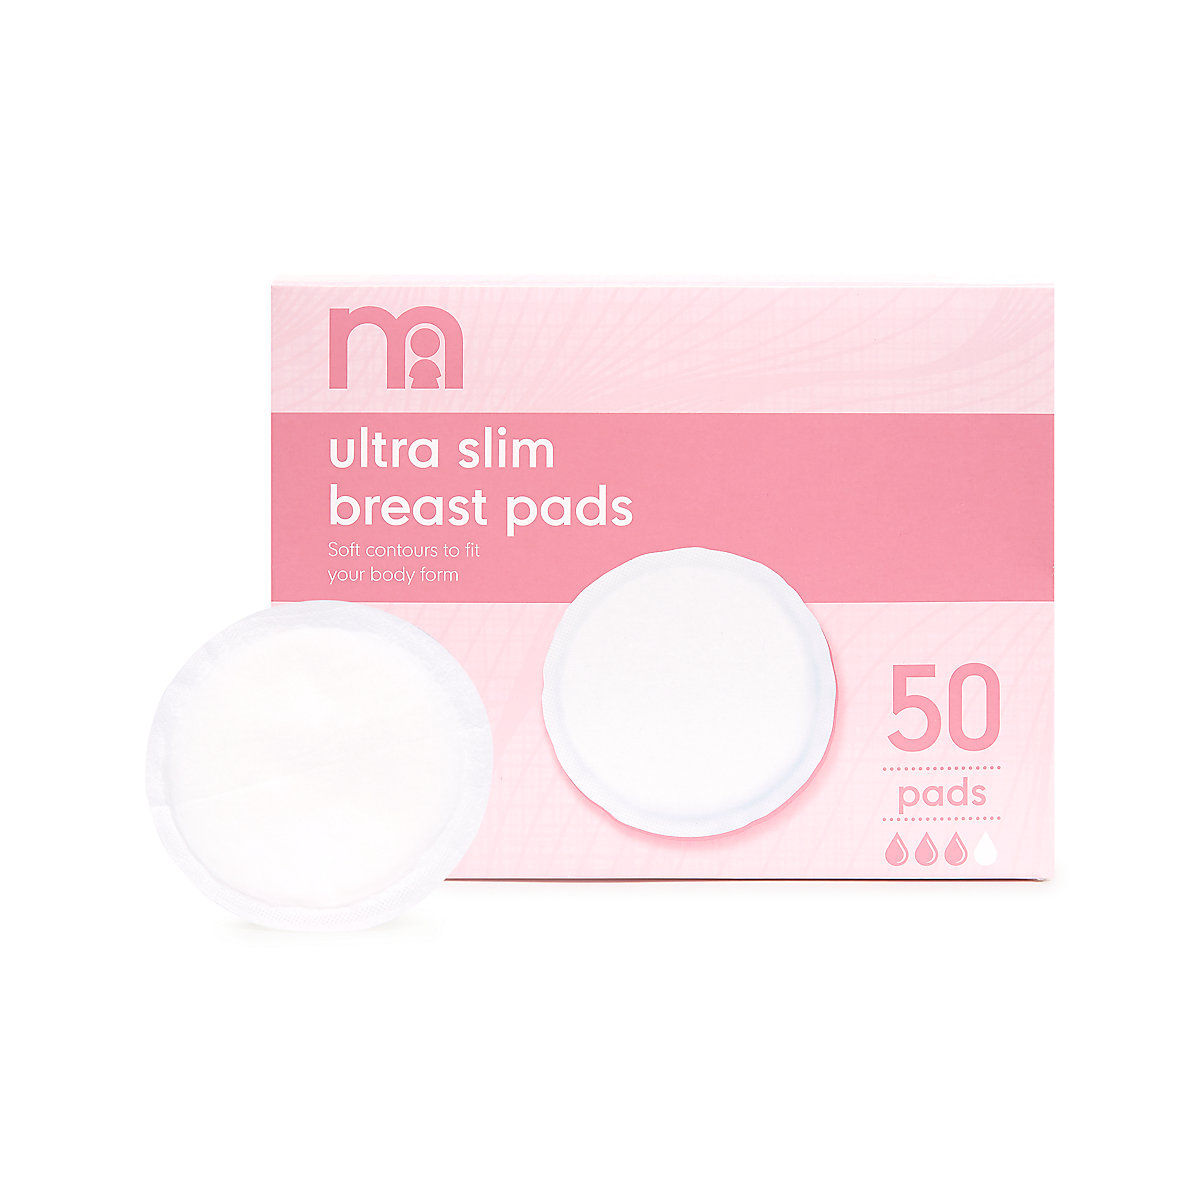 Mothercare Ultra Slim Breast Pads, 50 Count, Pack of 1 